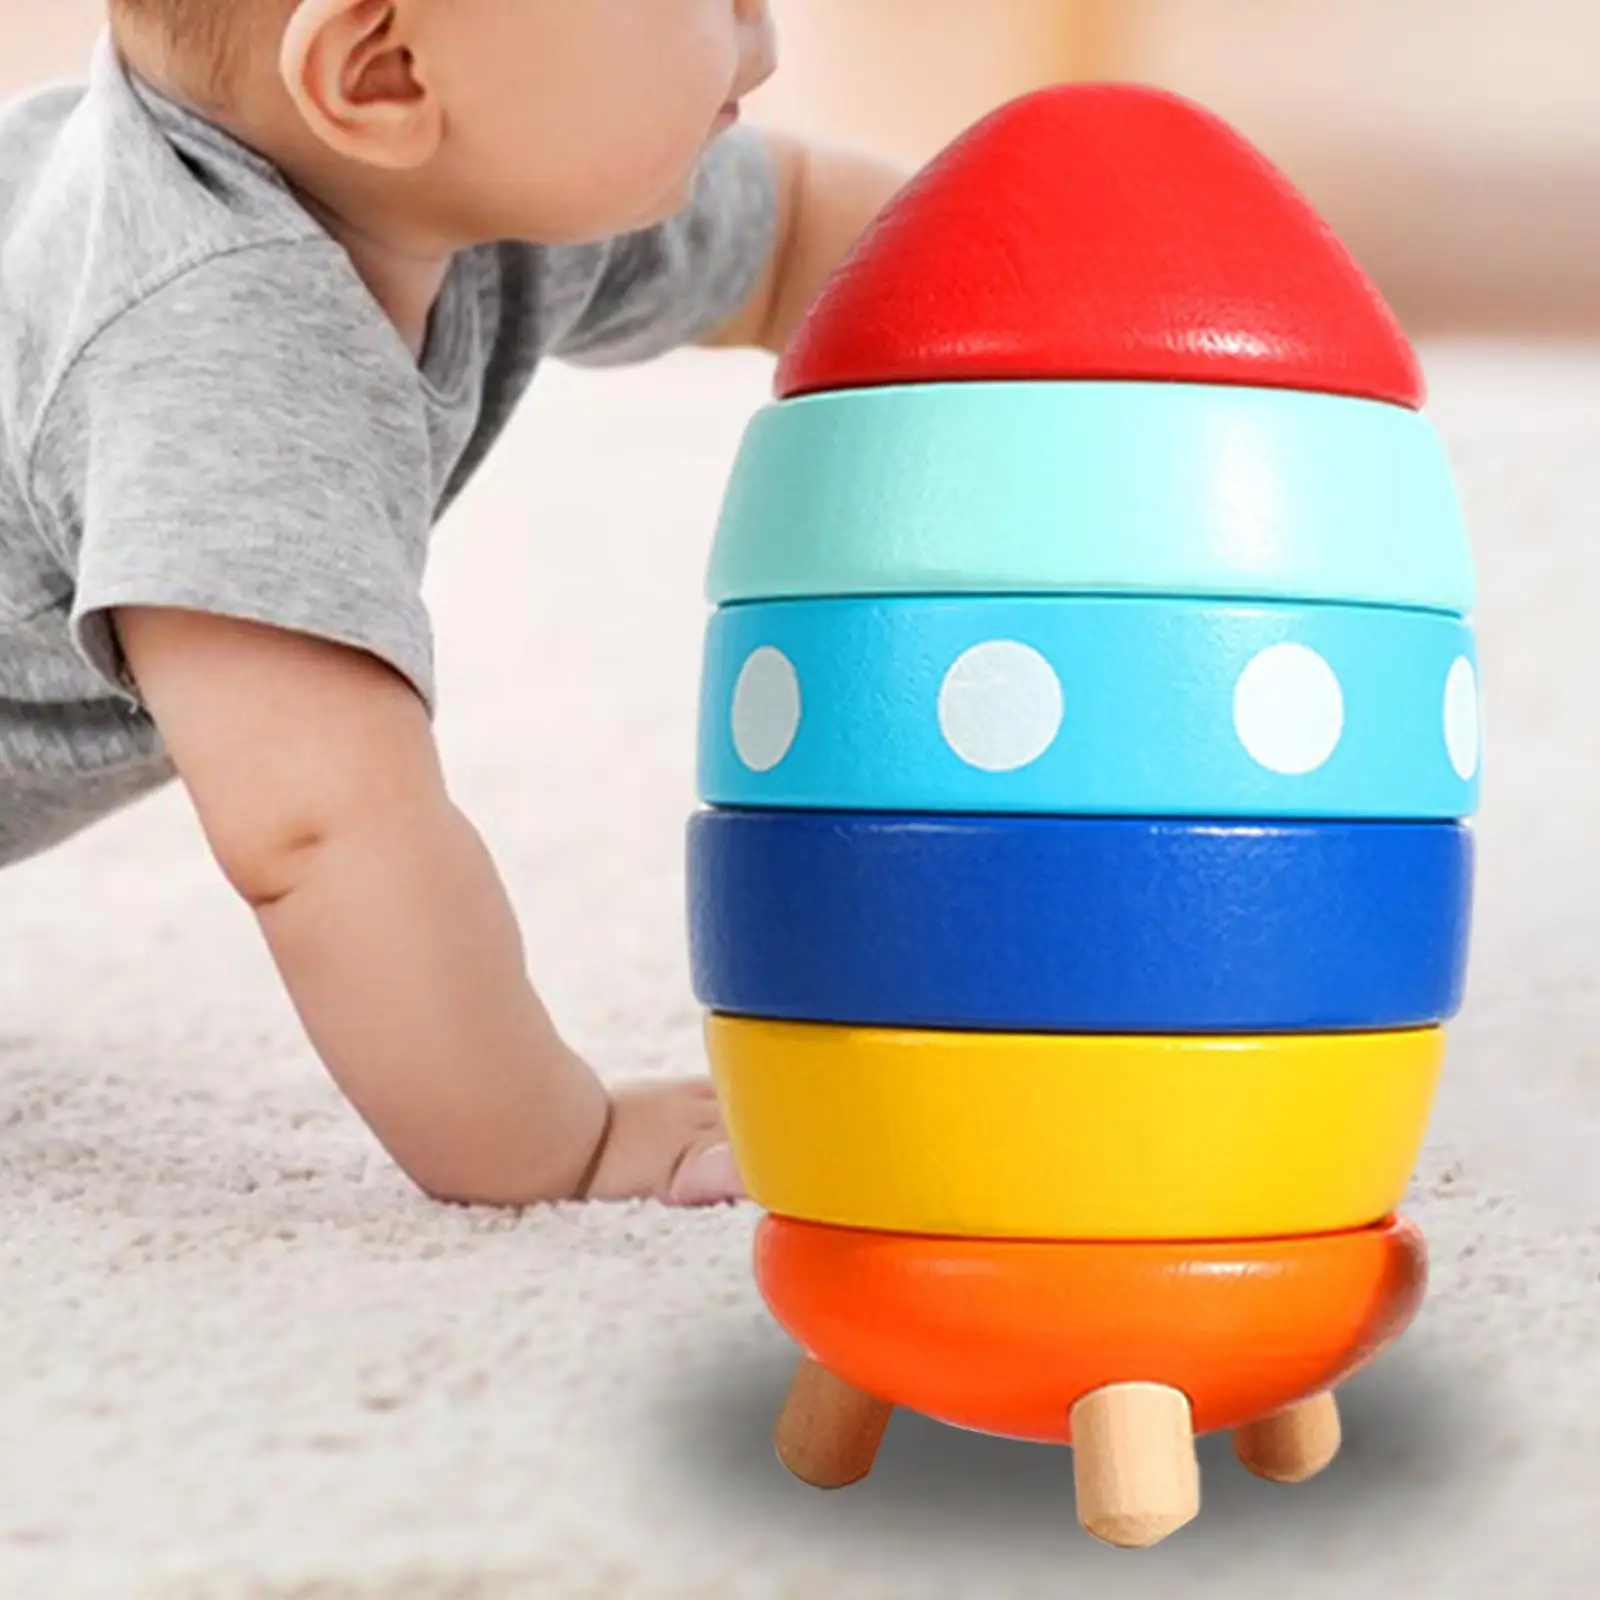 Wooden Colorful Rocket Shaped Stacking Toys Six Plug-in Parts Color Sorting